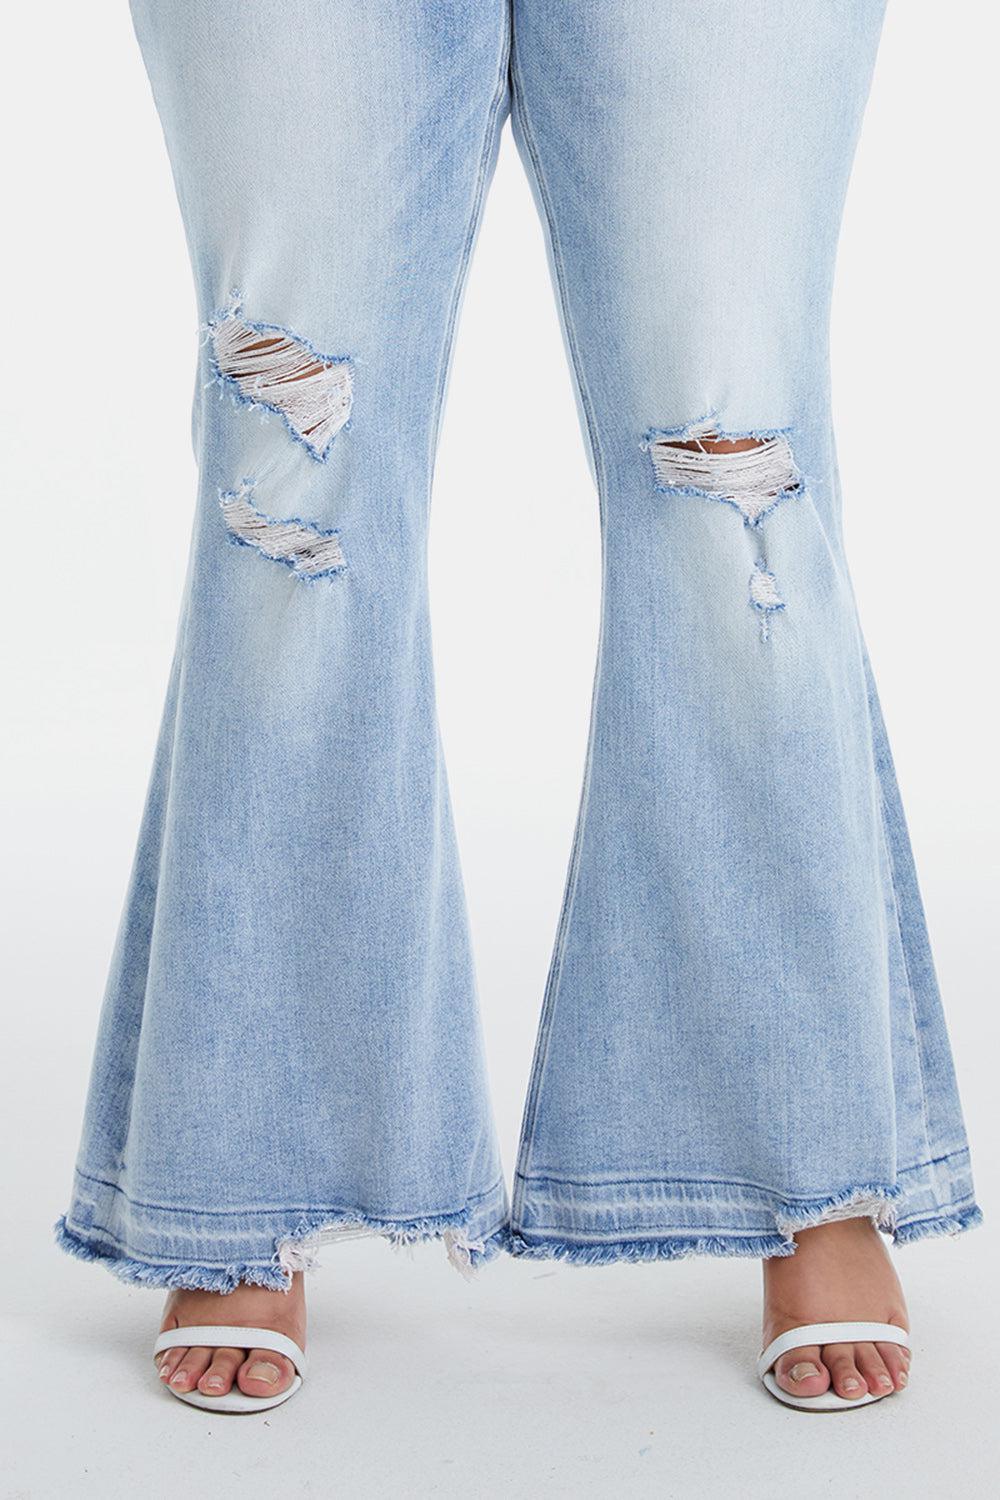 a pair of blue jeans with ripped knees